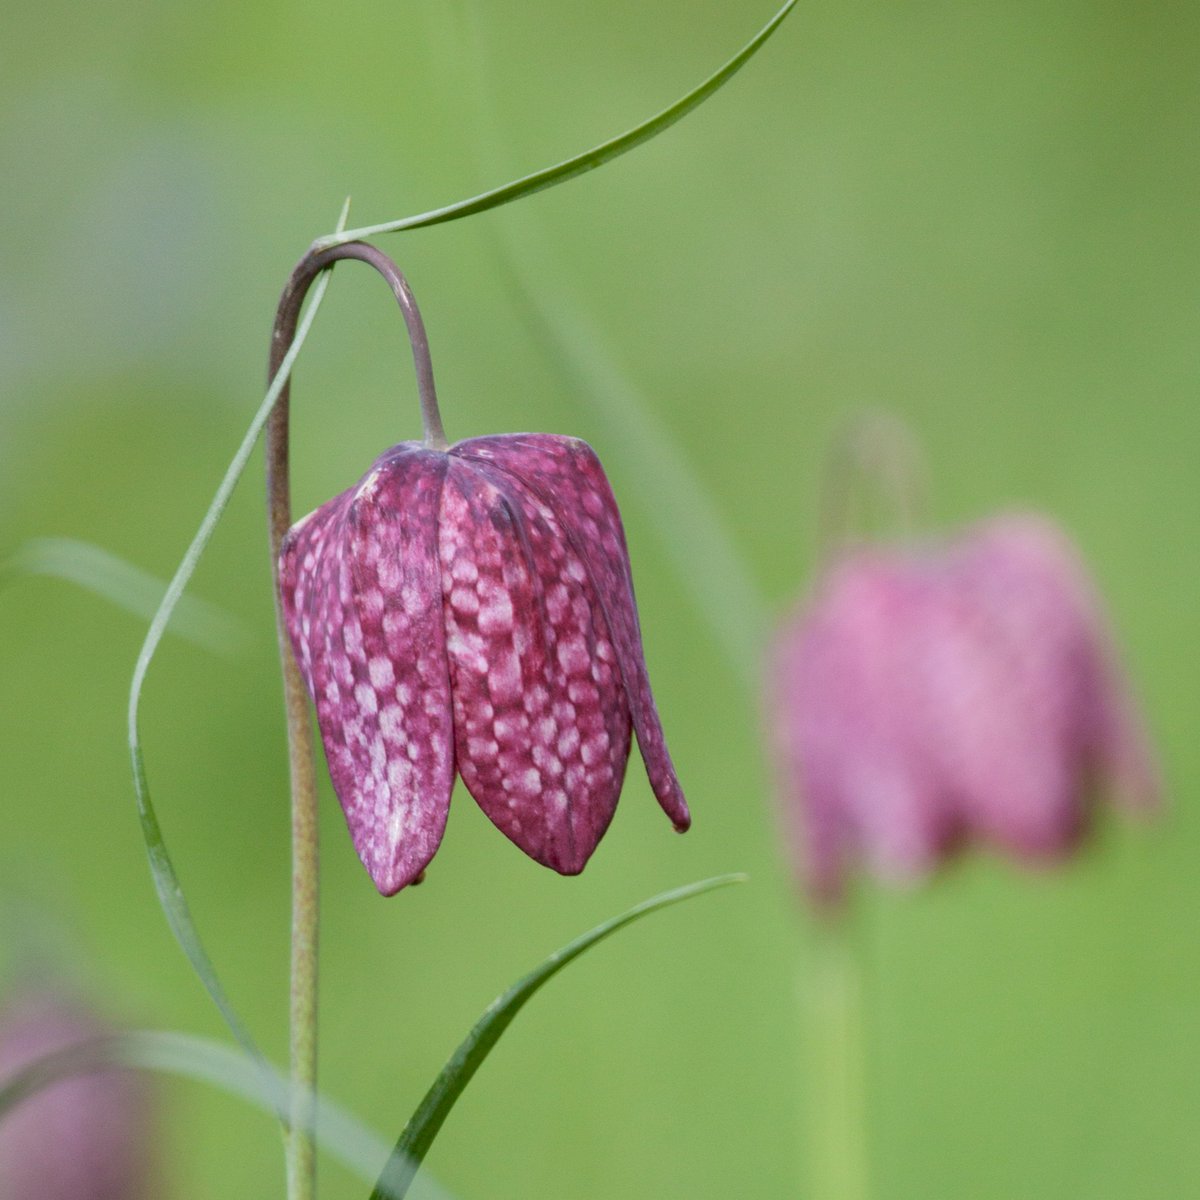 In the spring, the Snake's-head Fritillary blooms among other beautiful flowers like lady's smock and marsh marigold.  It's hanging wine-red crowns are gorgeous to behold.

#wildlife #nature #uknature #ukwildlife #animals #derbyshirewildlife